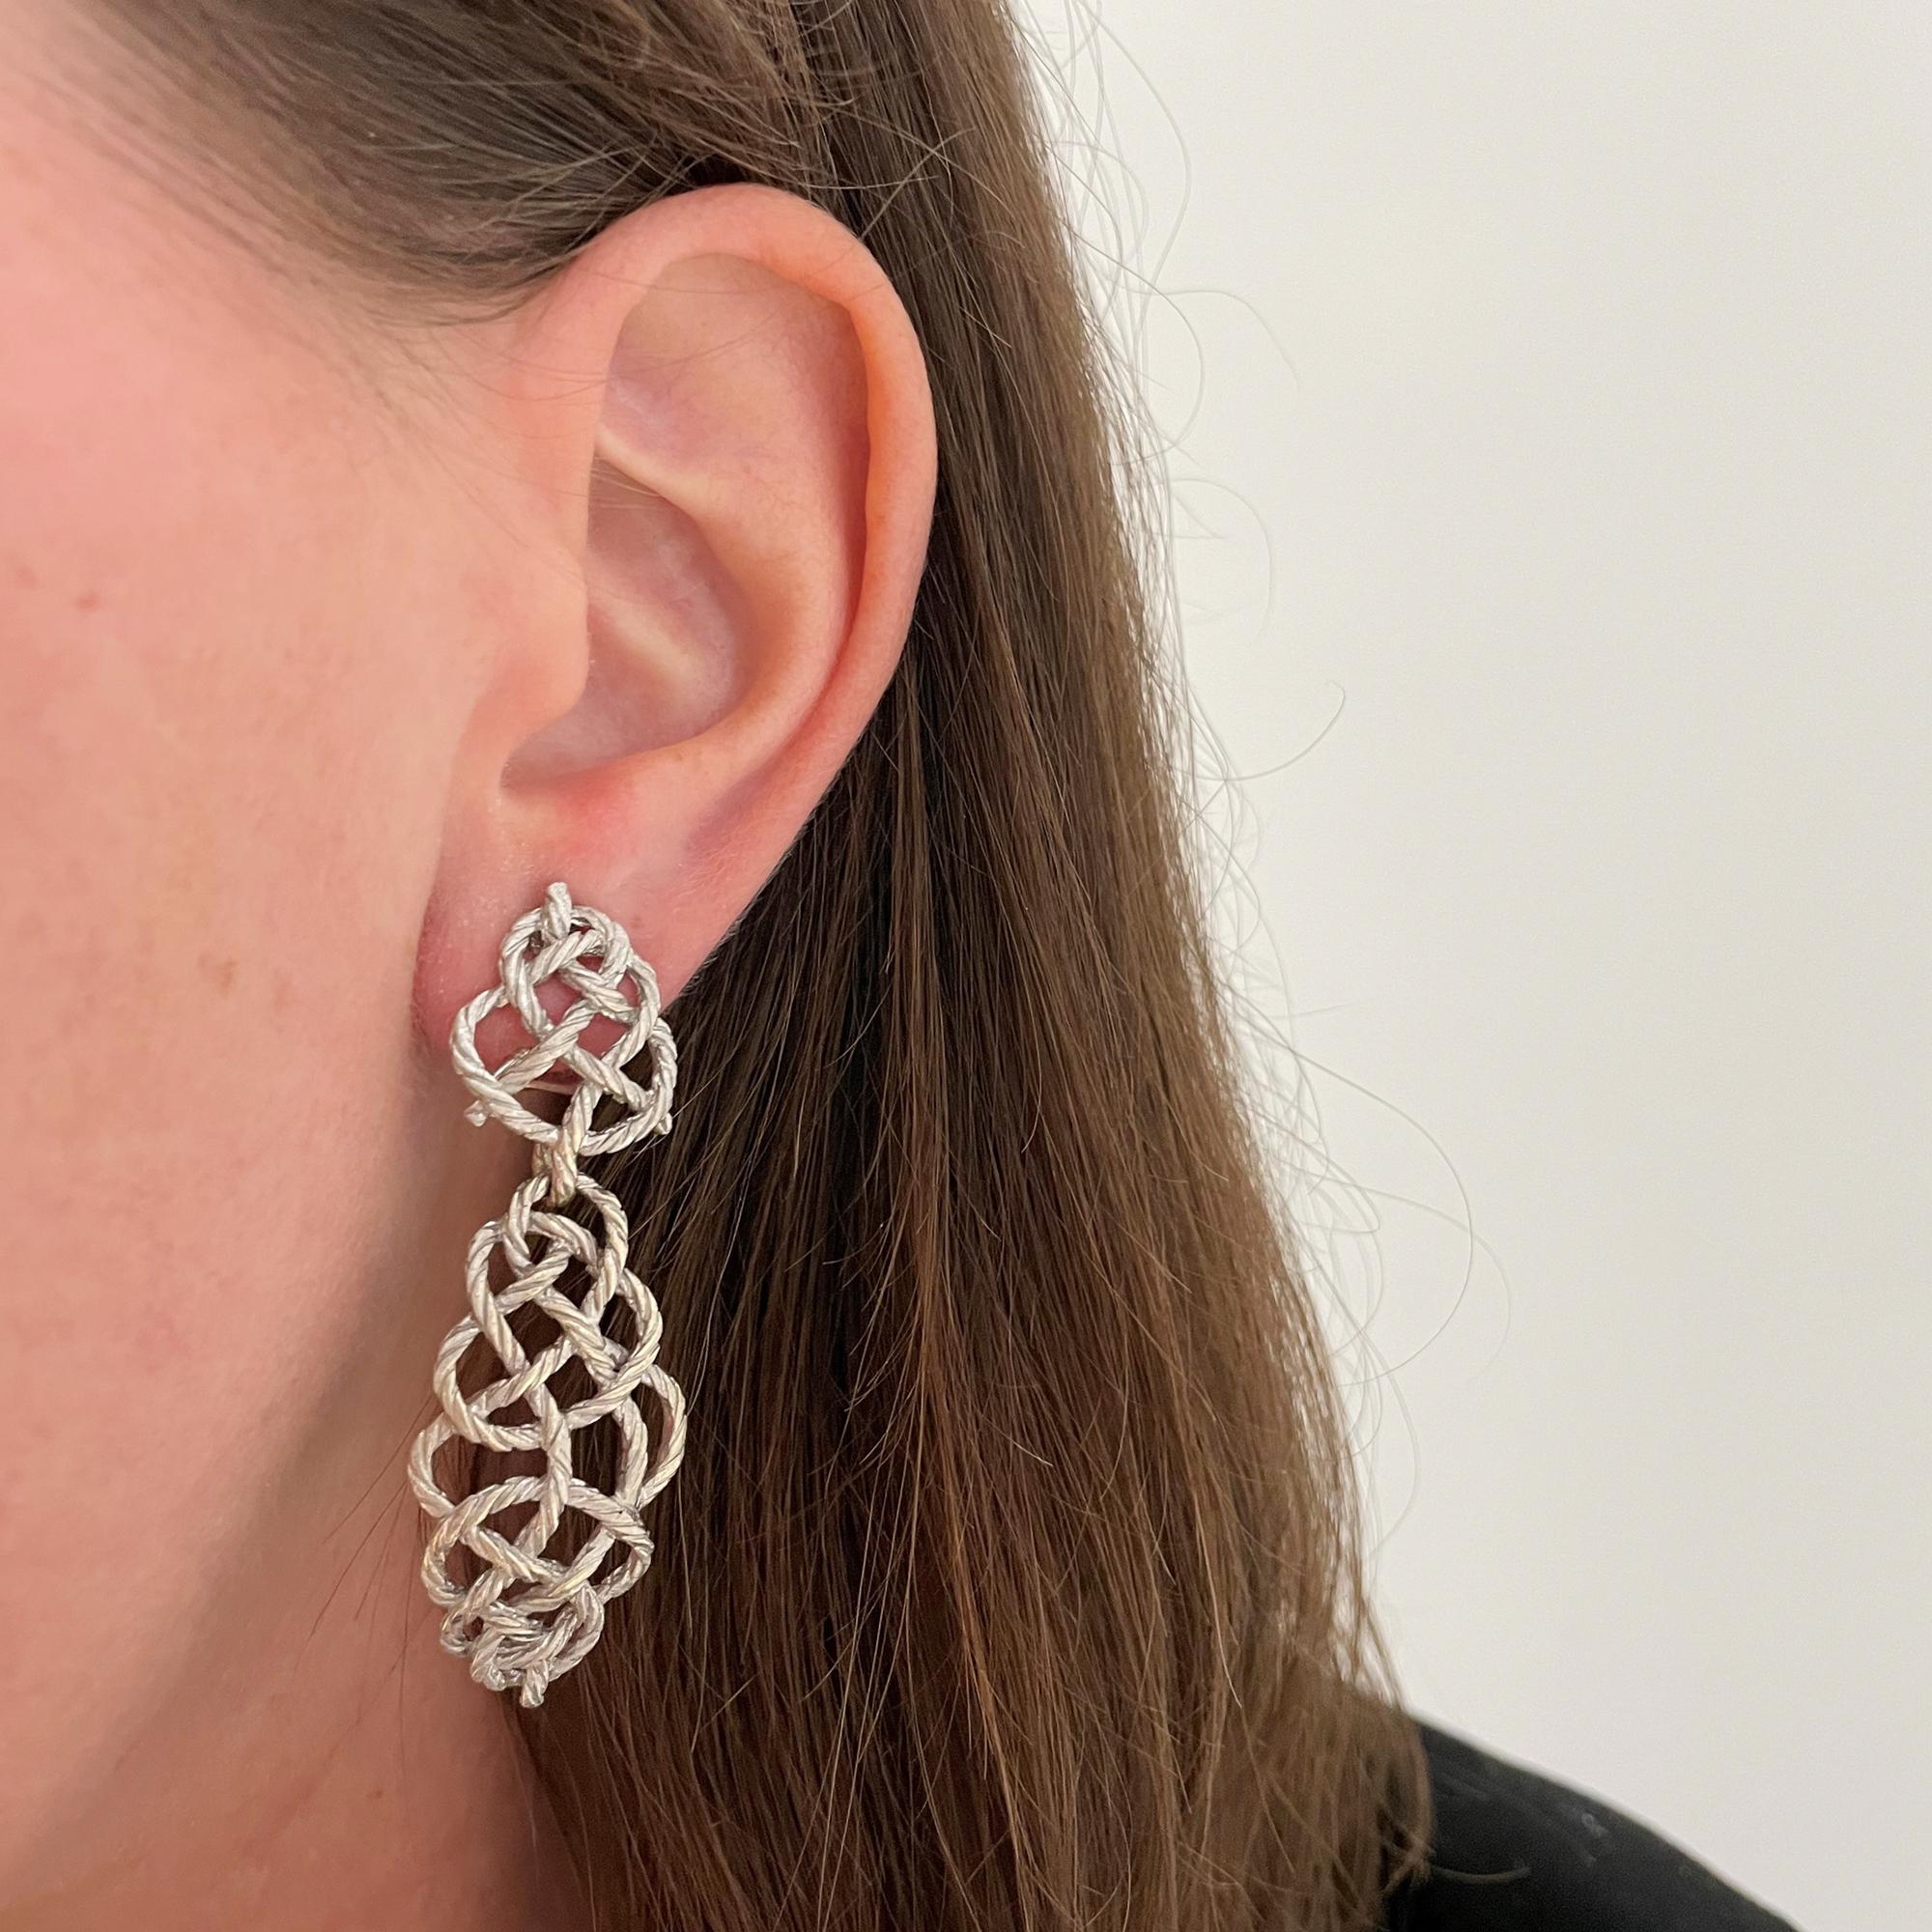 These Buccellati Crepe De Chine earrings feature a twist motif in 18K white gold with detachable pendants. Post and clip backs. 22 signed Buccellati Italy.

Tops 1 x 11/16 inch.
With pendants 2 3/8 x 13/16 inches.

